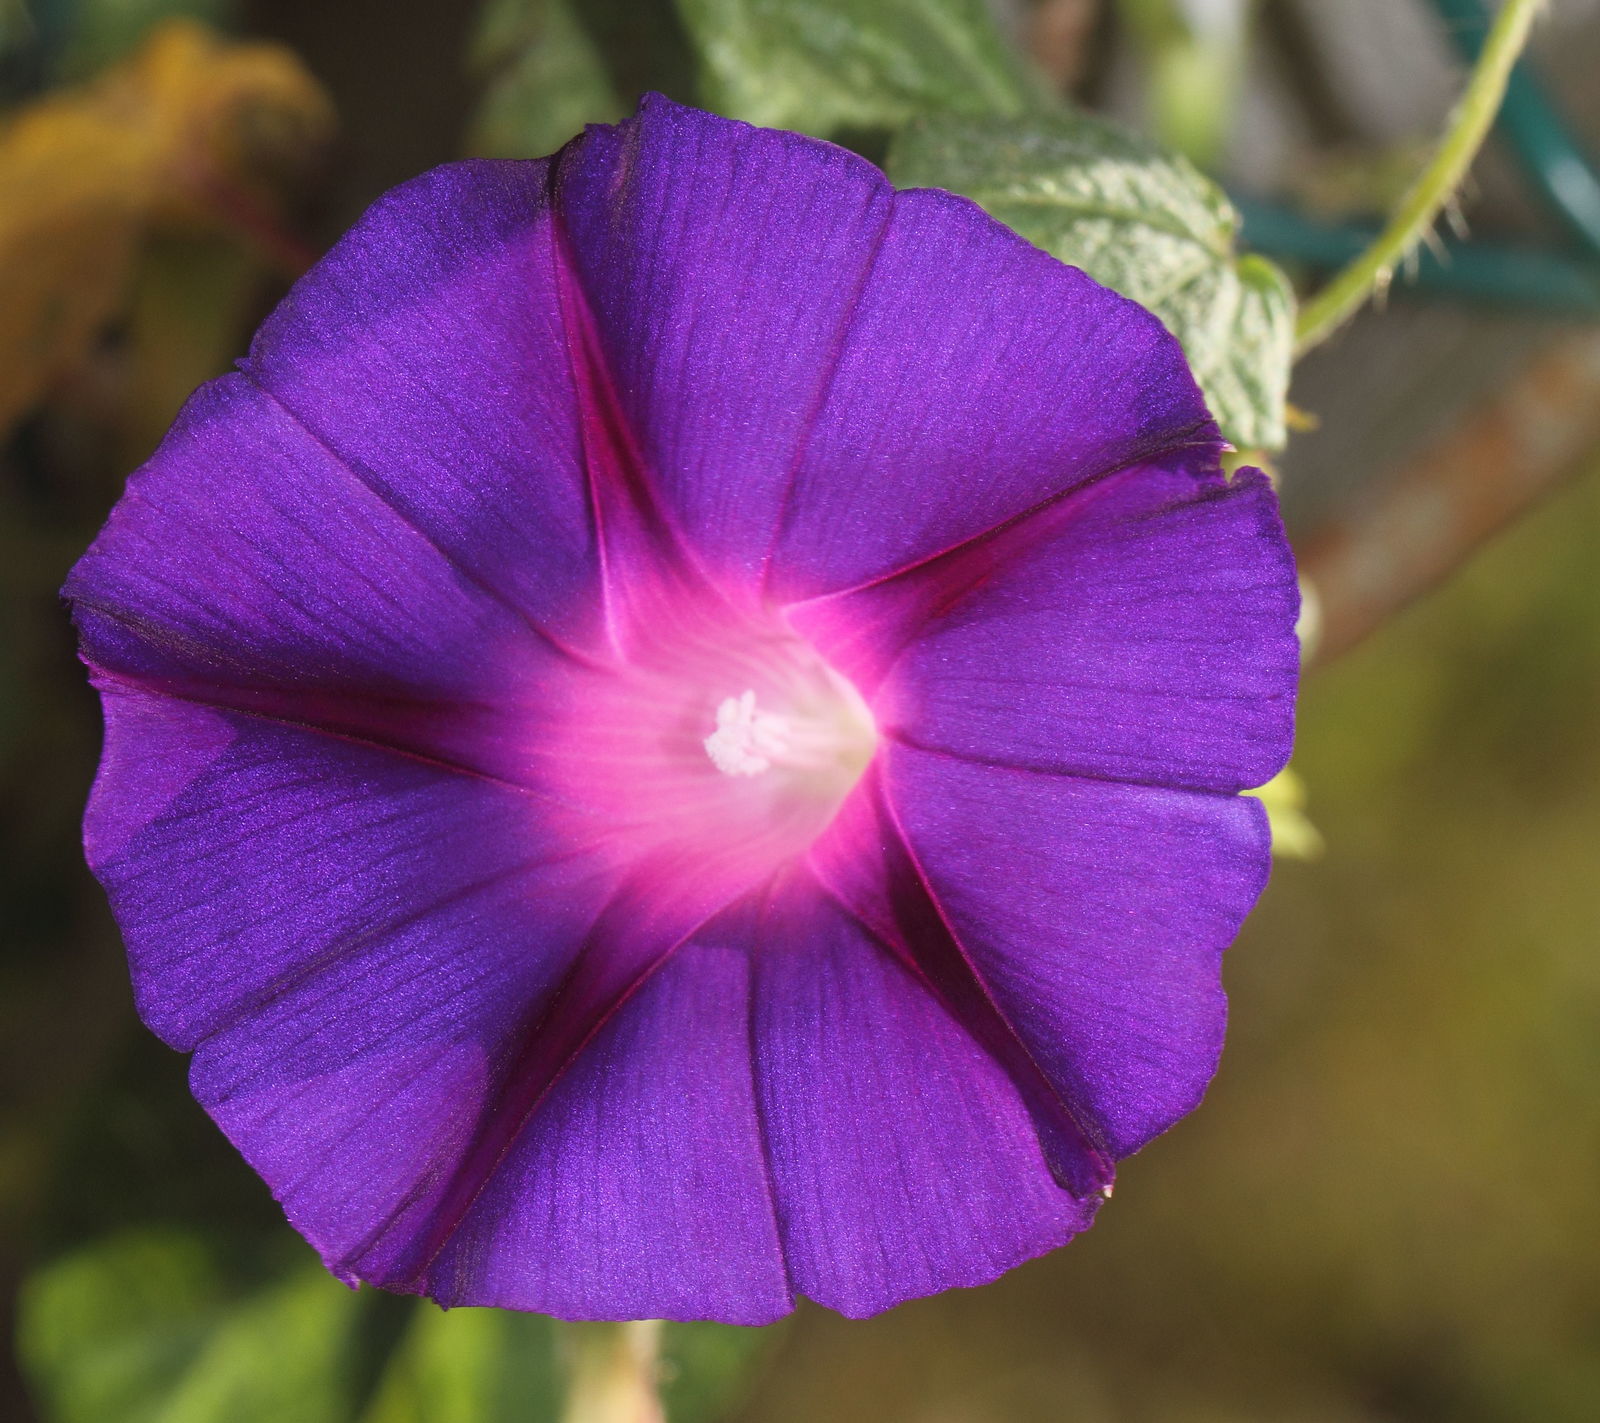 A foundation monograph of Ipomoea (Convolvulaceae) in the New World